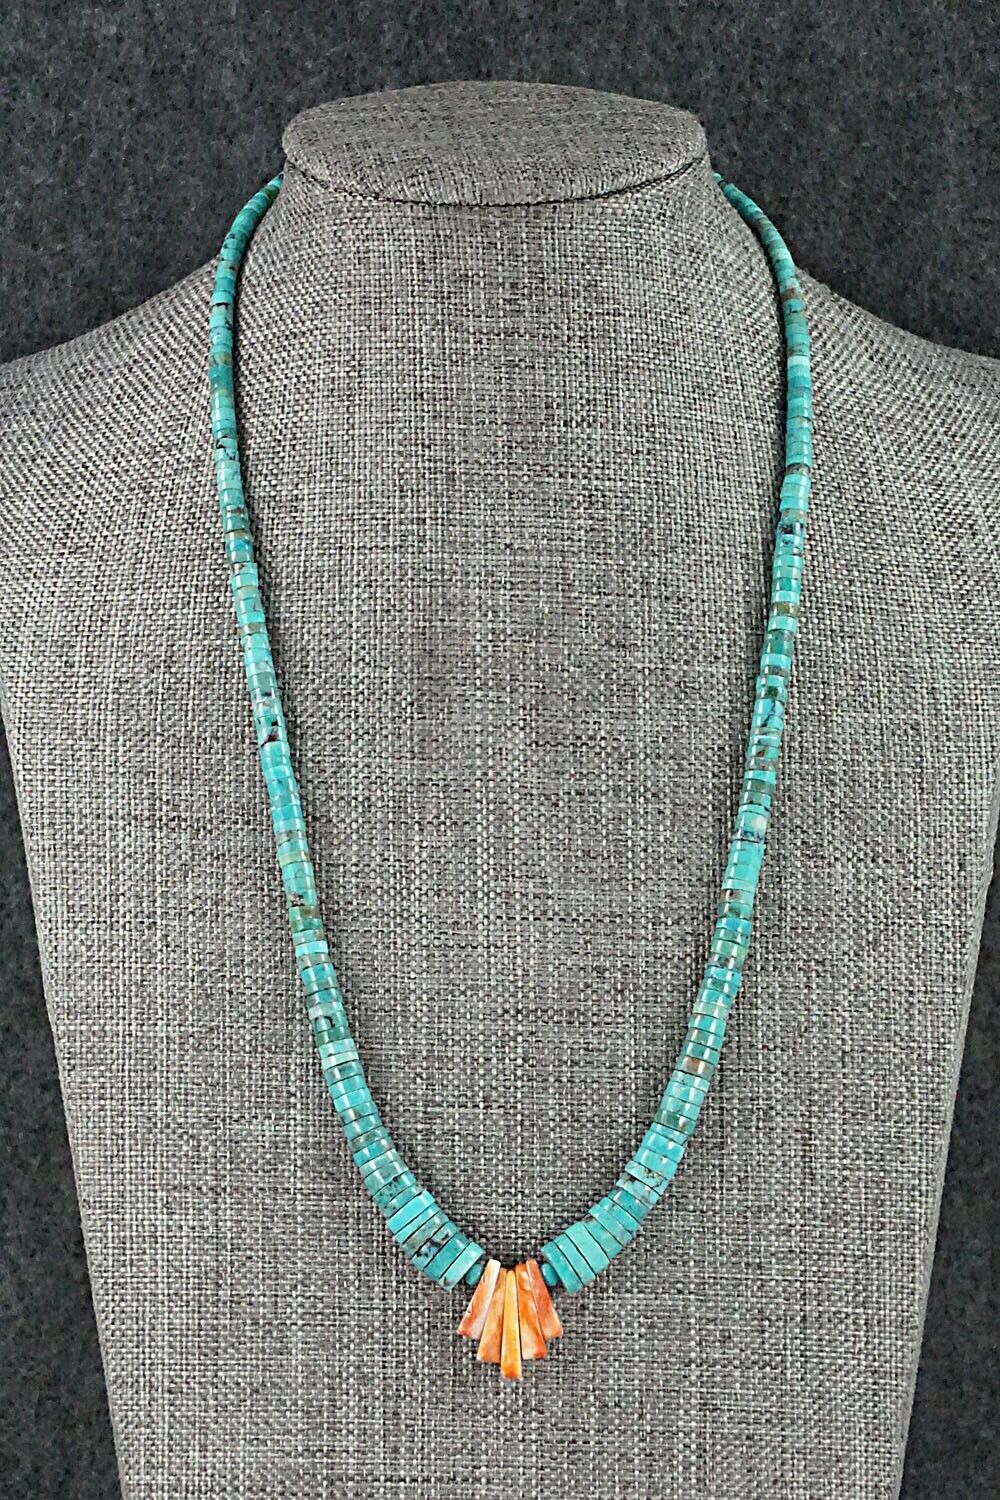 Turquoise & Spiny Oyster Necklace - Susie Deal